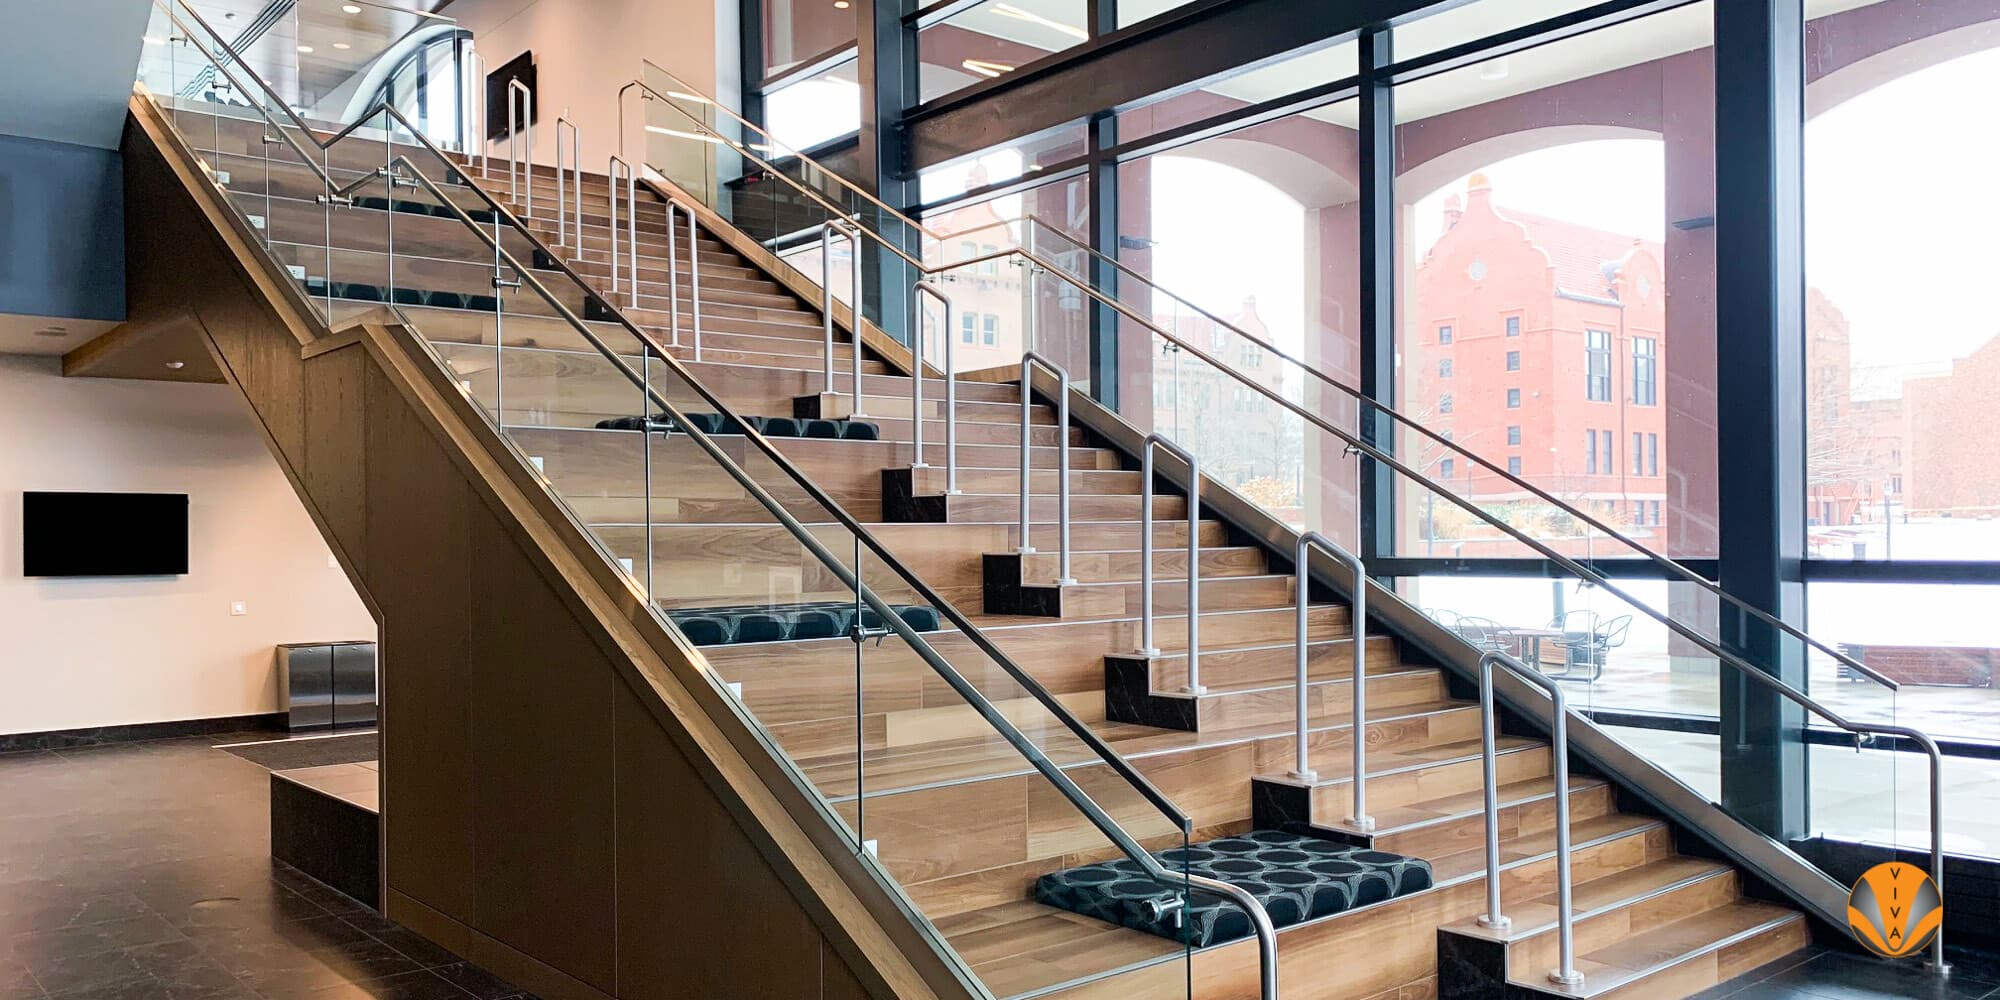 MILLIKAN COLLEGE SHOE GLASS RAILING SYSTEM 3 of 3